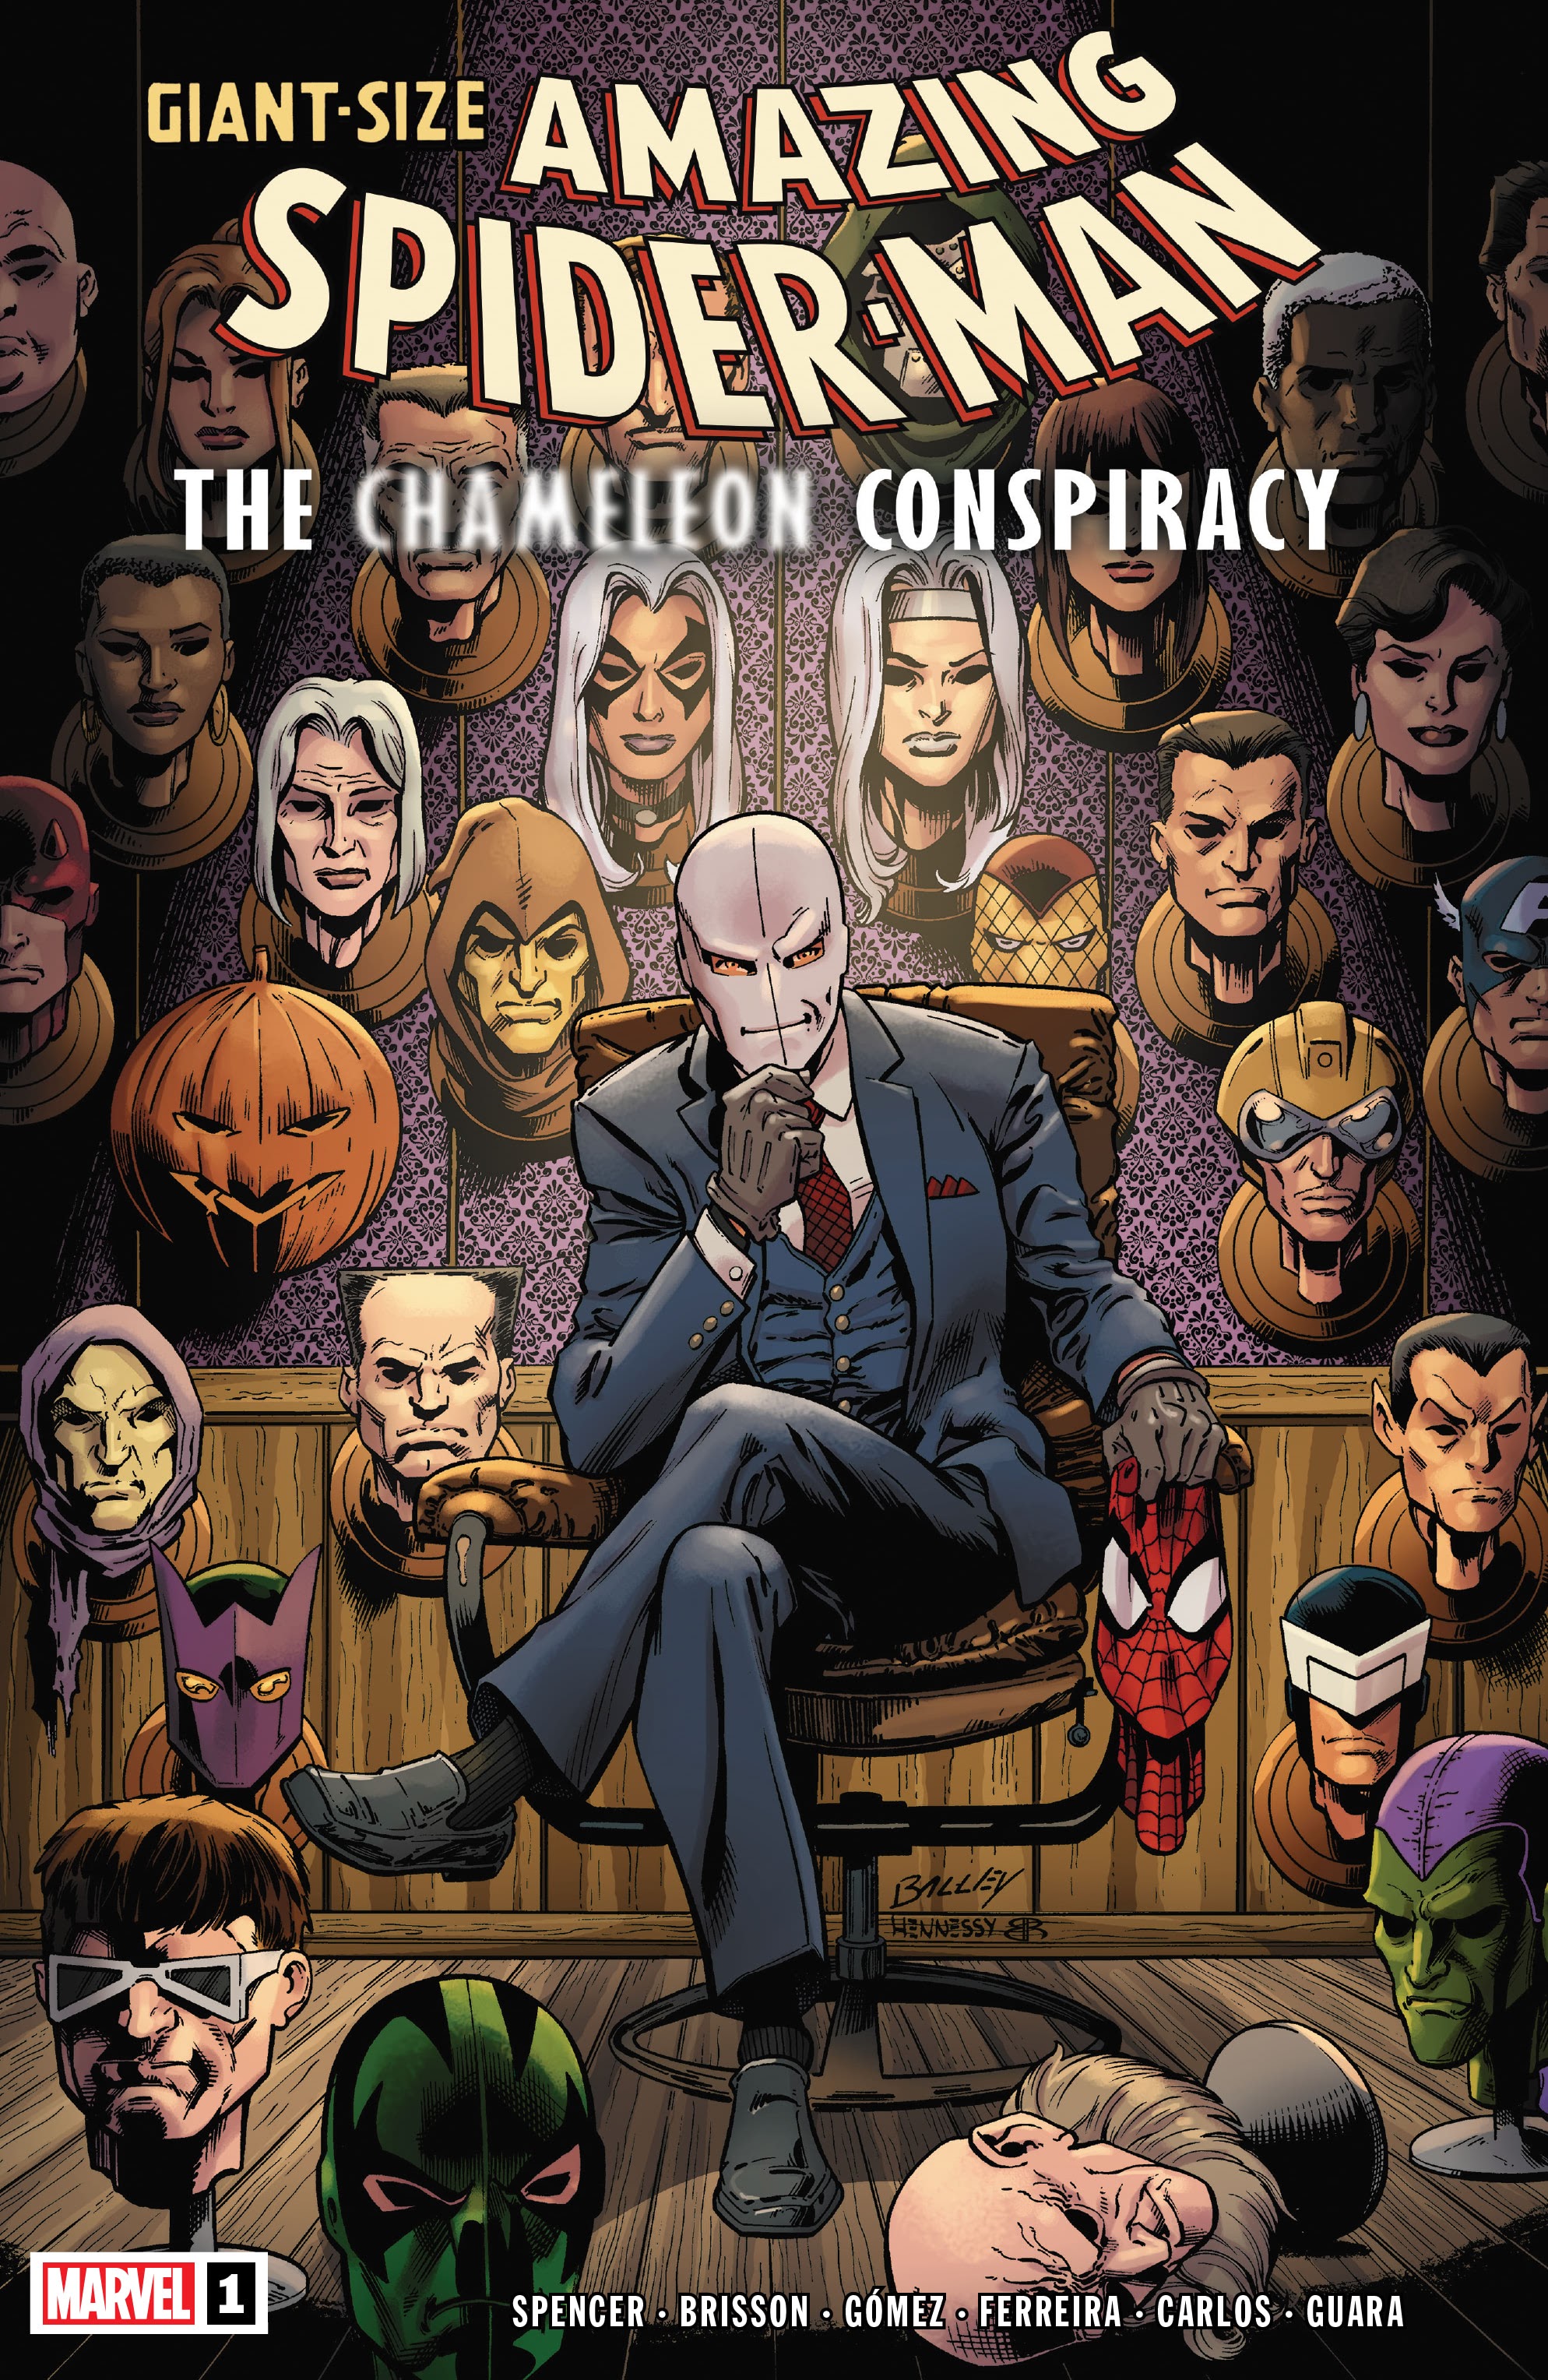 Read online Giant-Size Amazing Spider-Man comic -  Issue # Chameleon Conspiracy - 1